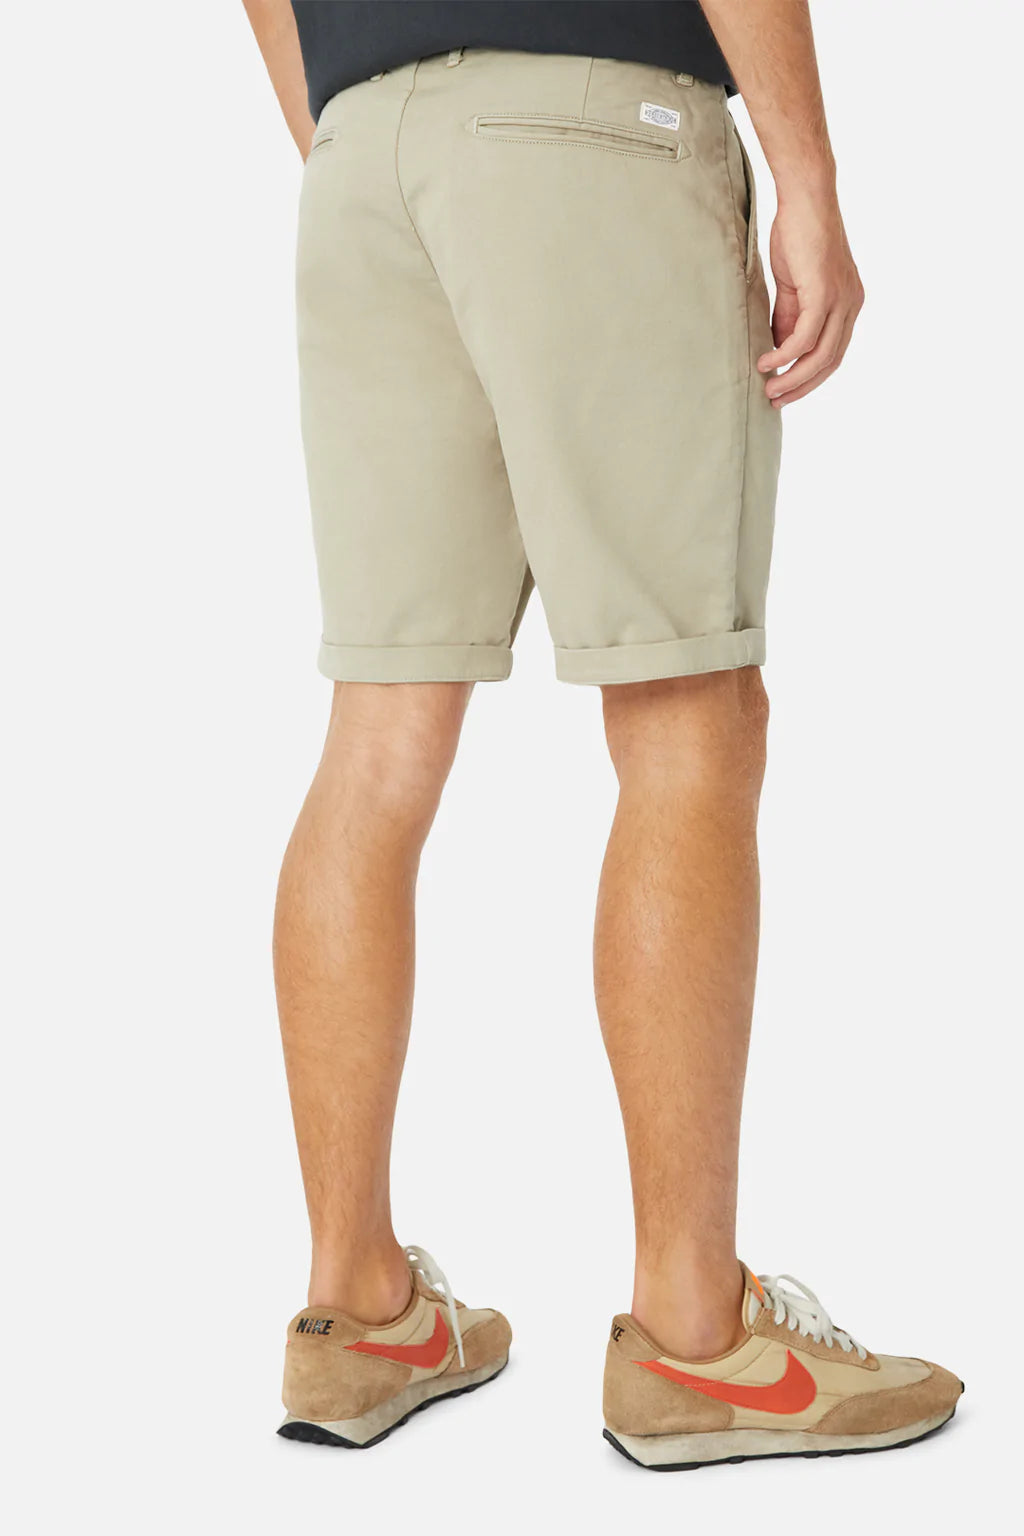 INDUSTRIE - THE RINSE DRIFTER SHORT - OD STONE